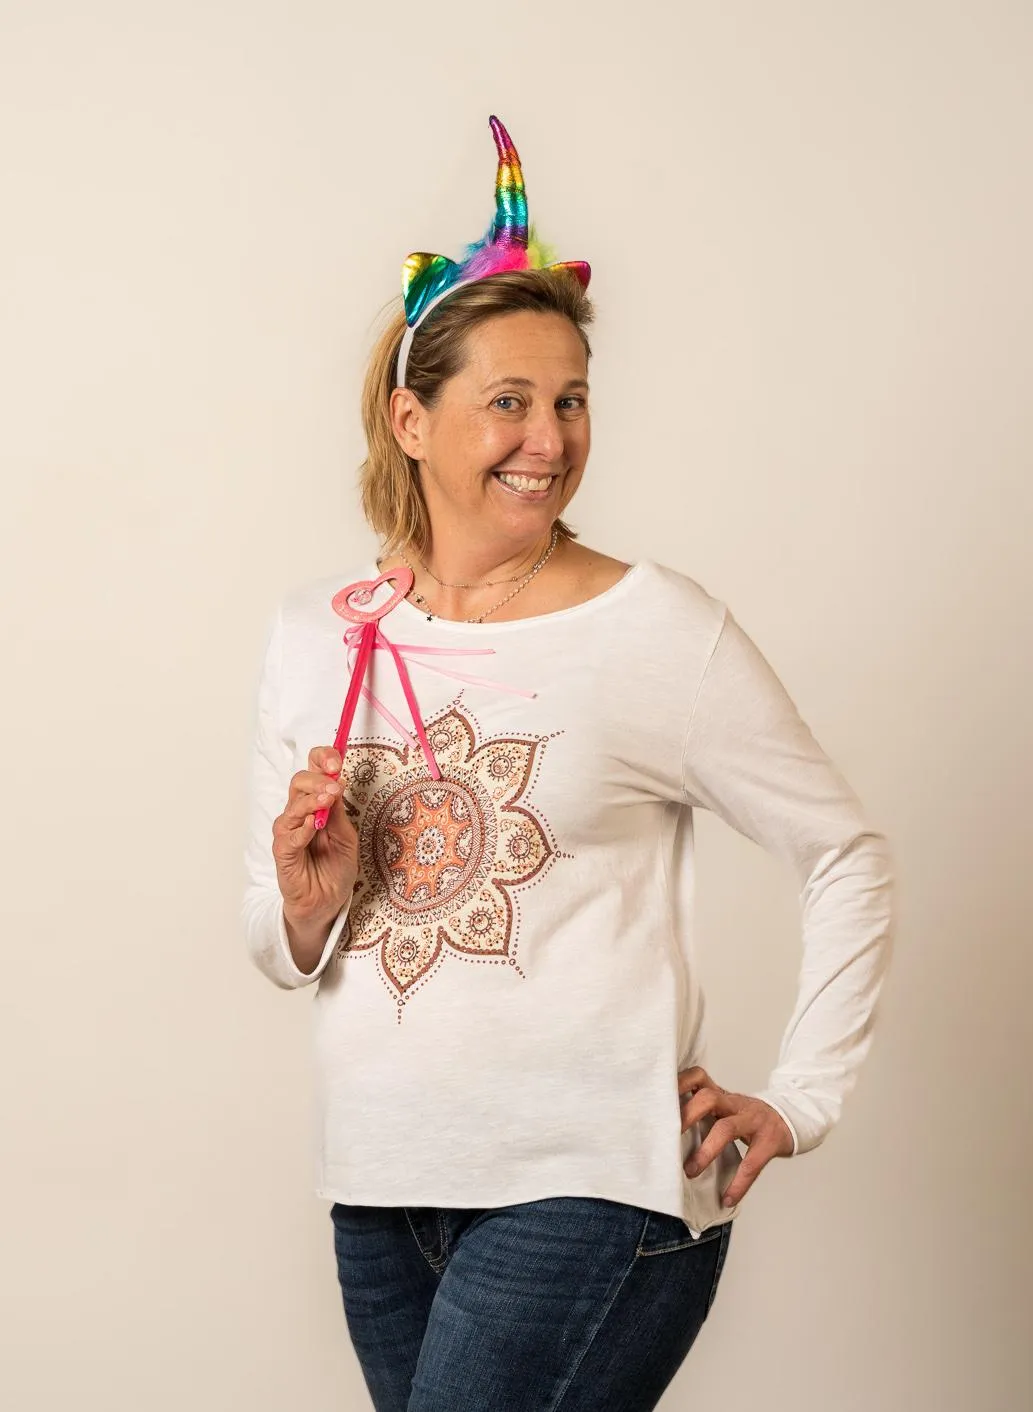 Jenn Baljko, from Always on My Way's Fierce Awakened Women mentorship program, joyfully embraces her playful side, inviting us to reconnect with our inner child and experience the transformative power of fun and self-discovery.